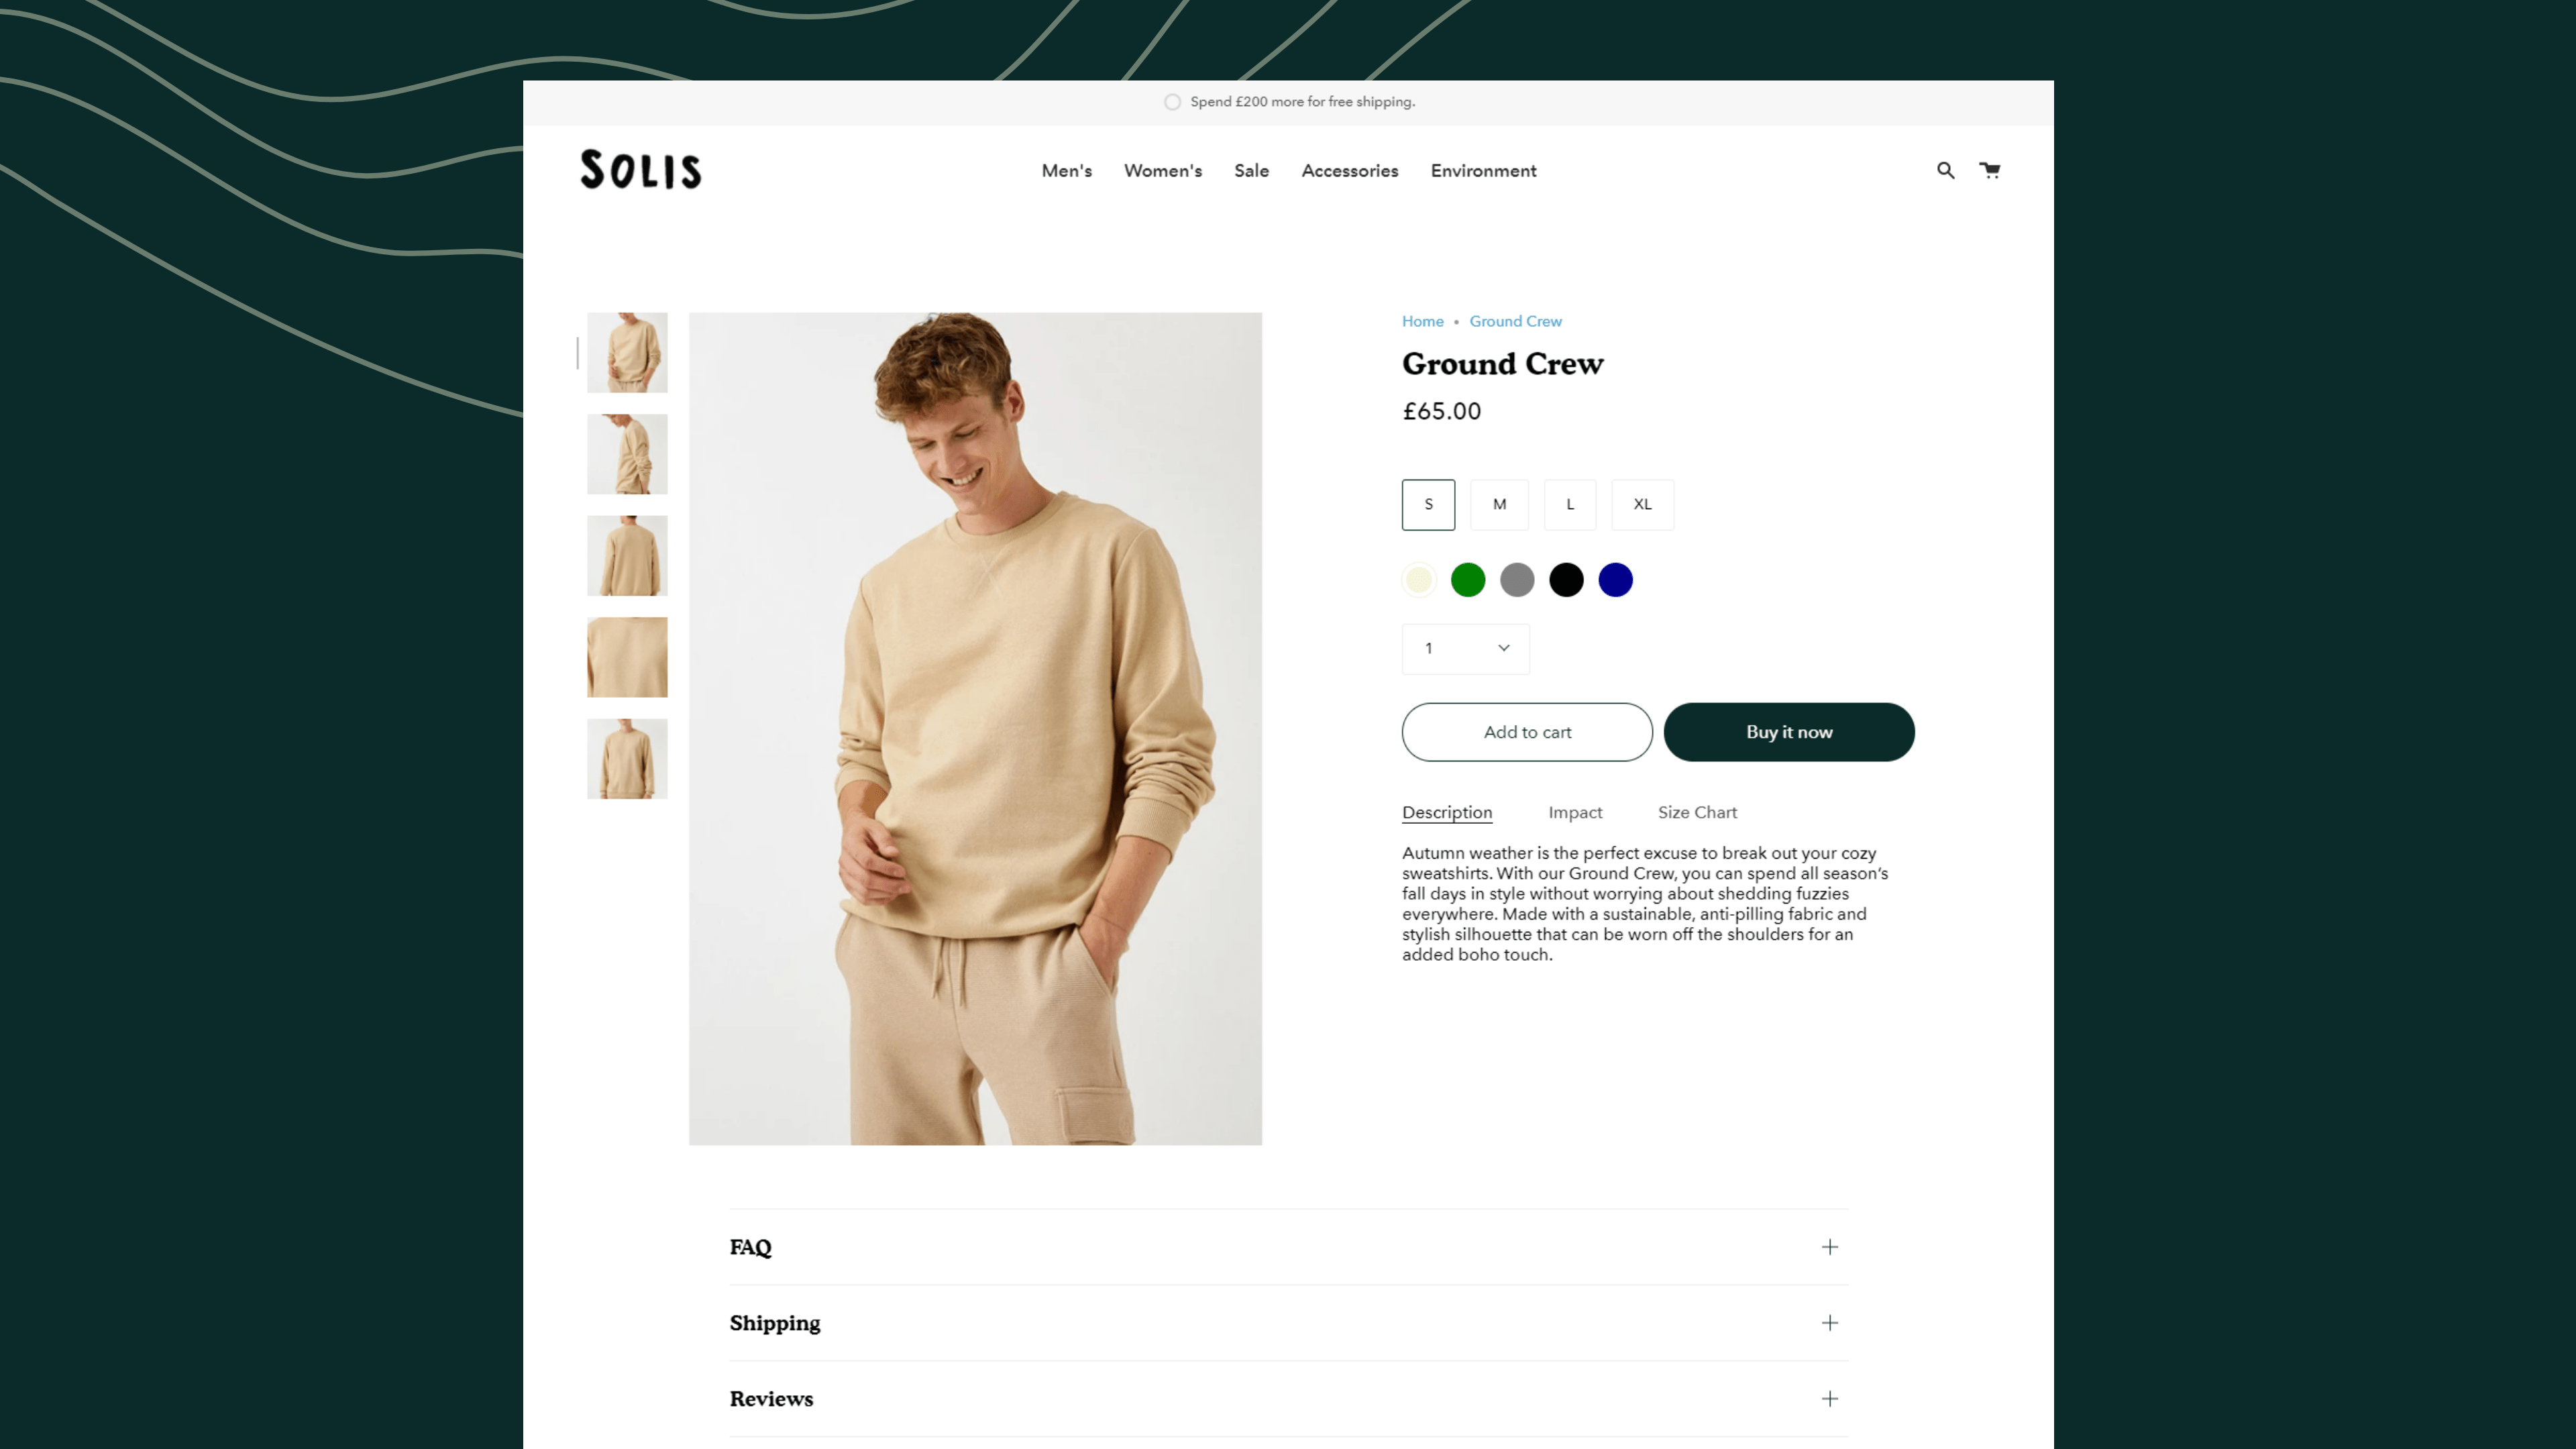 Clothing brand website product page design